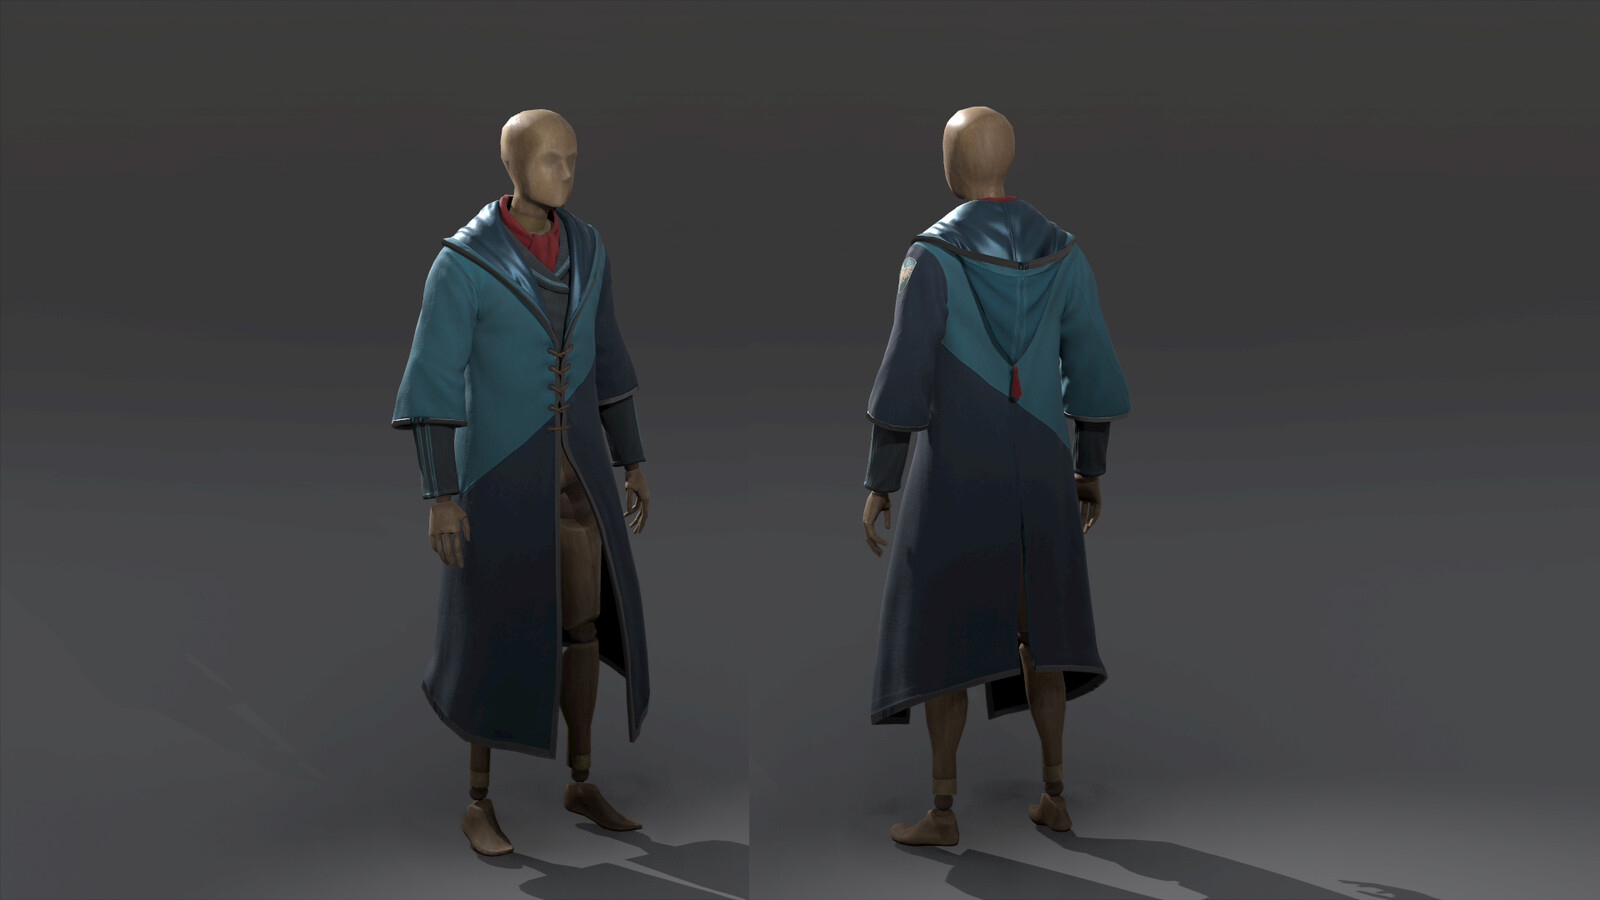 For these robes I used existing geometry and updated/ made textures for this robe set.